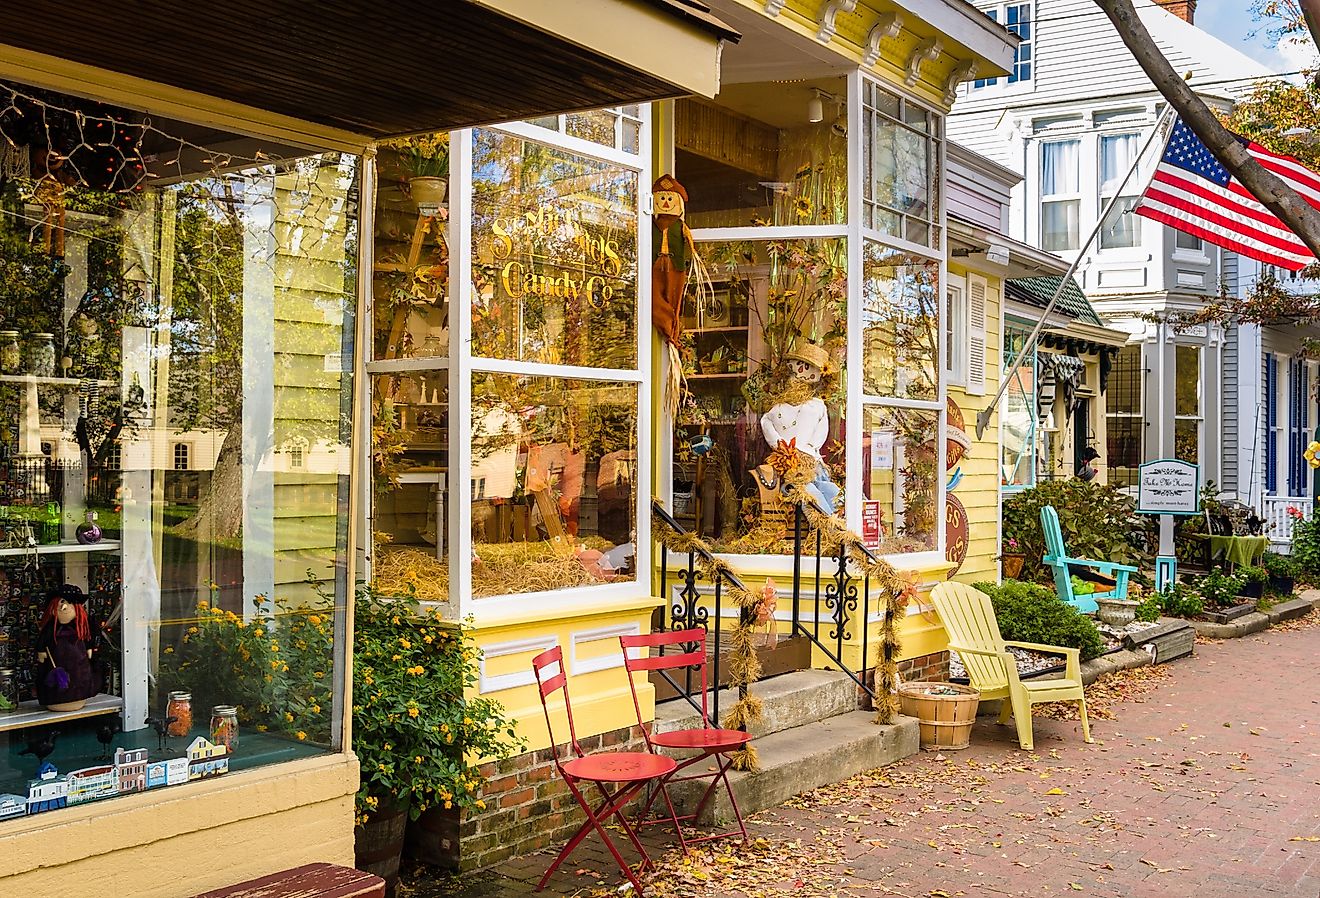 Store decorated for Halloween on Talbot Street, St. Michaels, Maryland. Image credit Albert Pego via Shutterstock